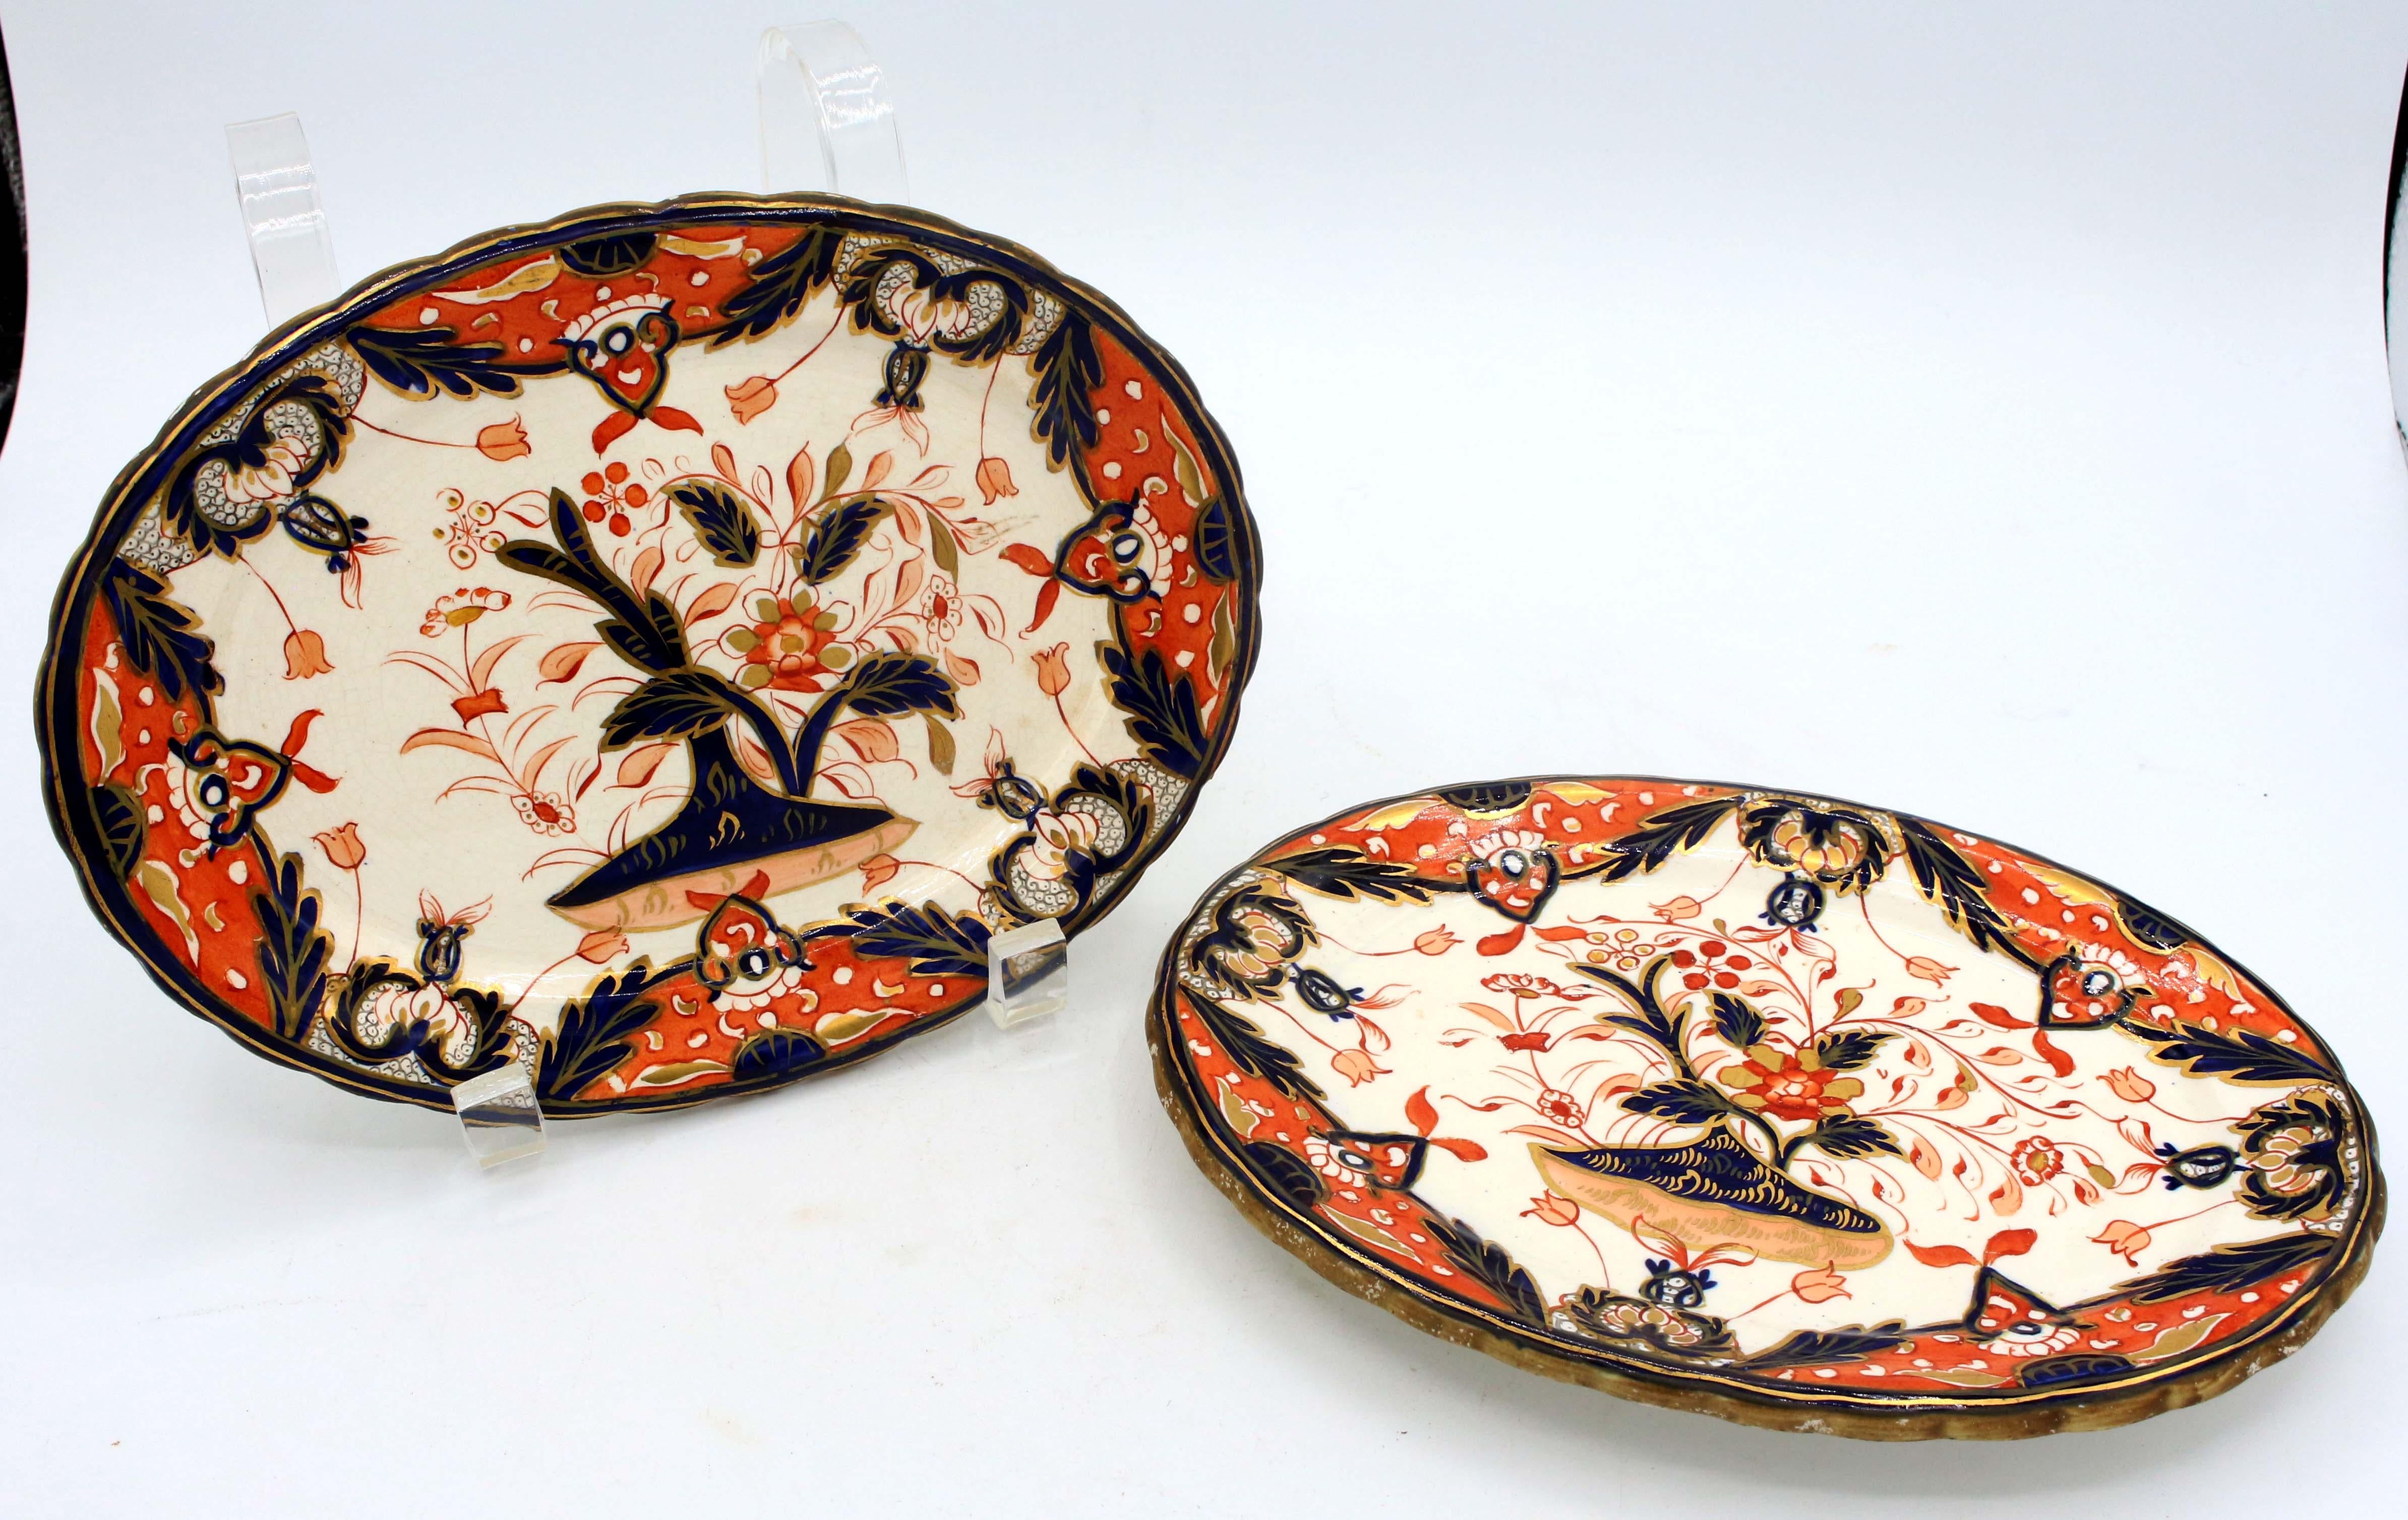 Pair of saucier stands, stoneware by Davenport, Imari pattern, late 19th century. Impressed registry & Davenport marks on one, both with retailer stamp in Manchester (Bandbach & Co, King St). Registry: March 13, 1879.
8 1/8